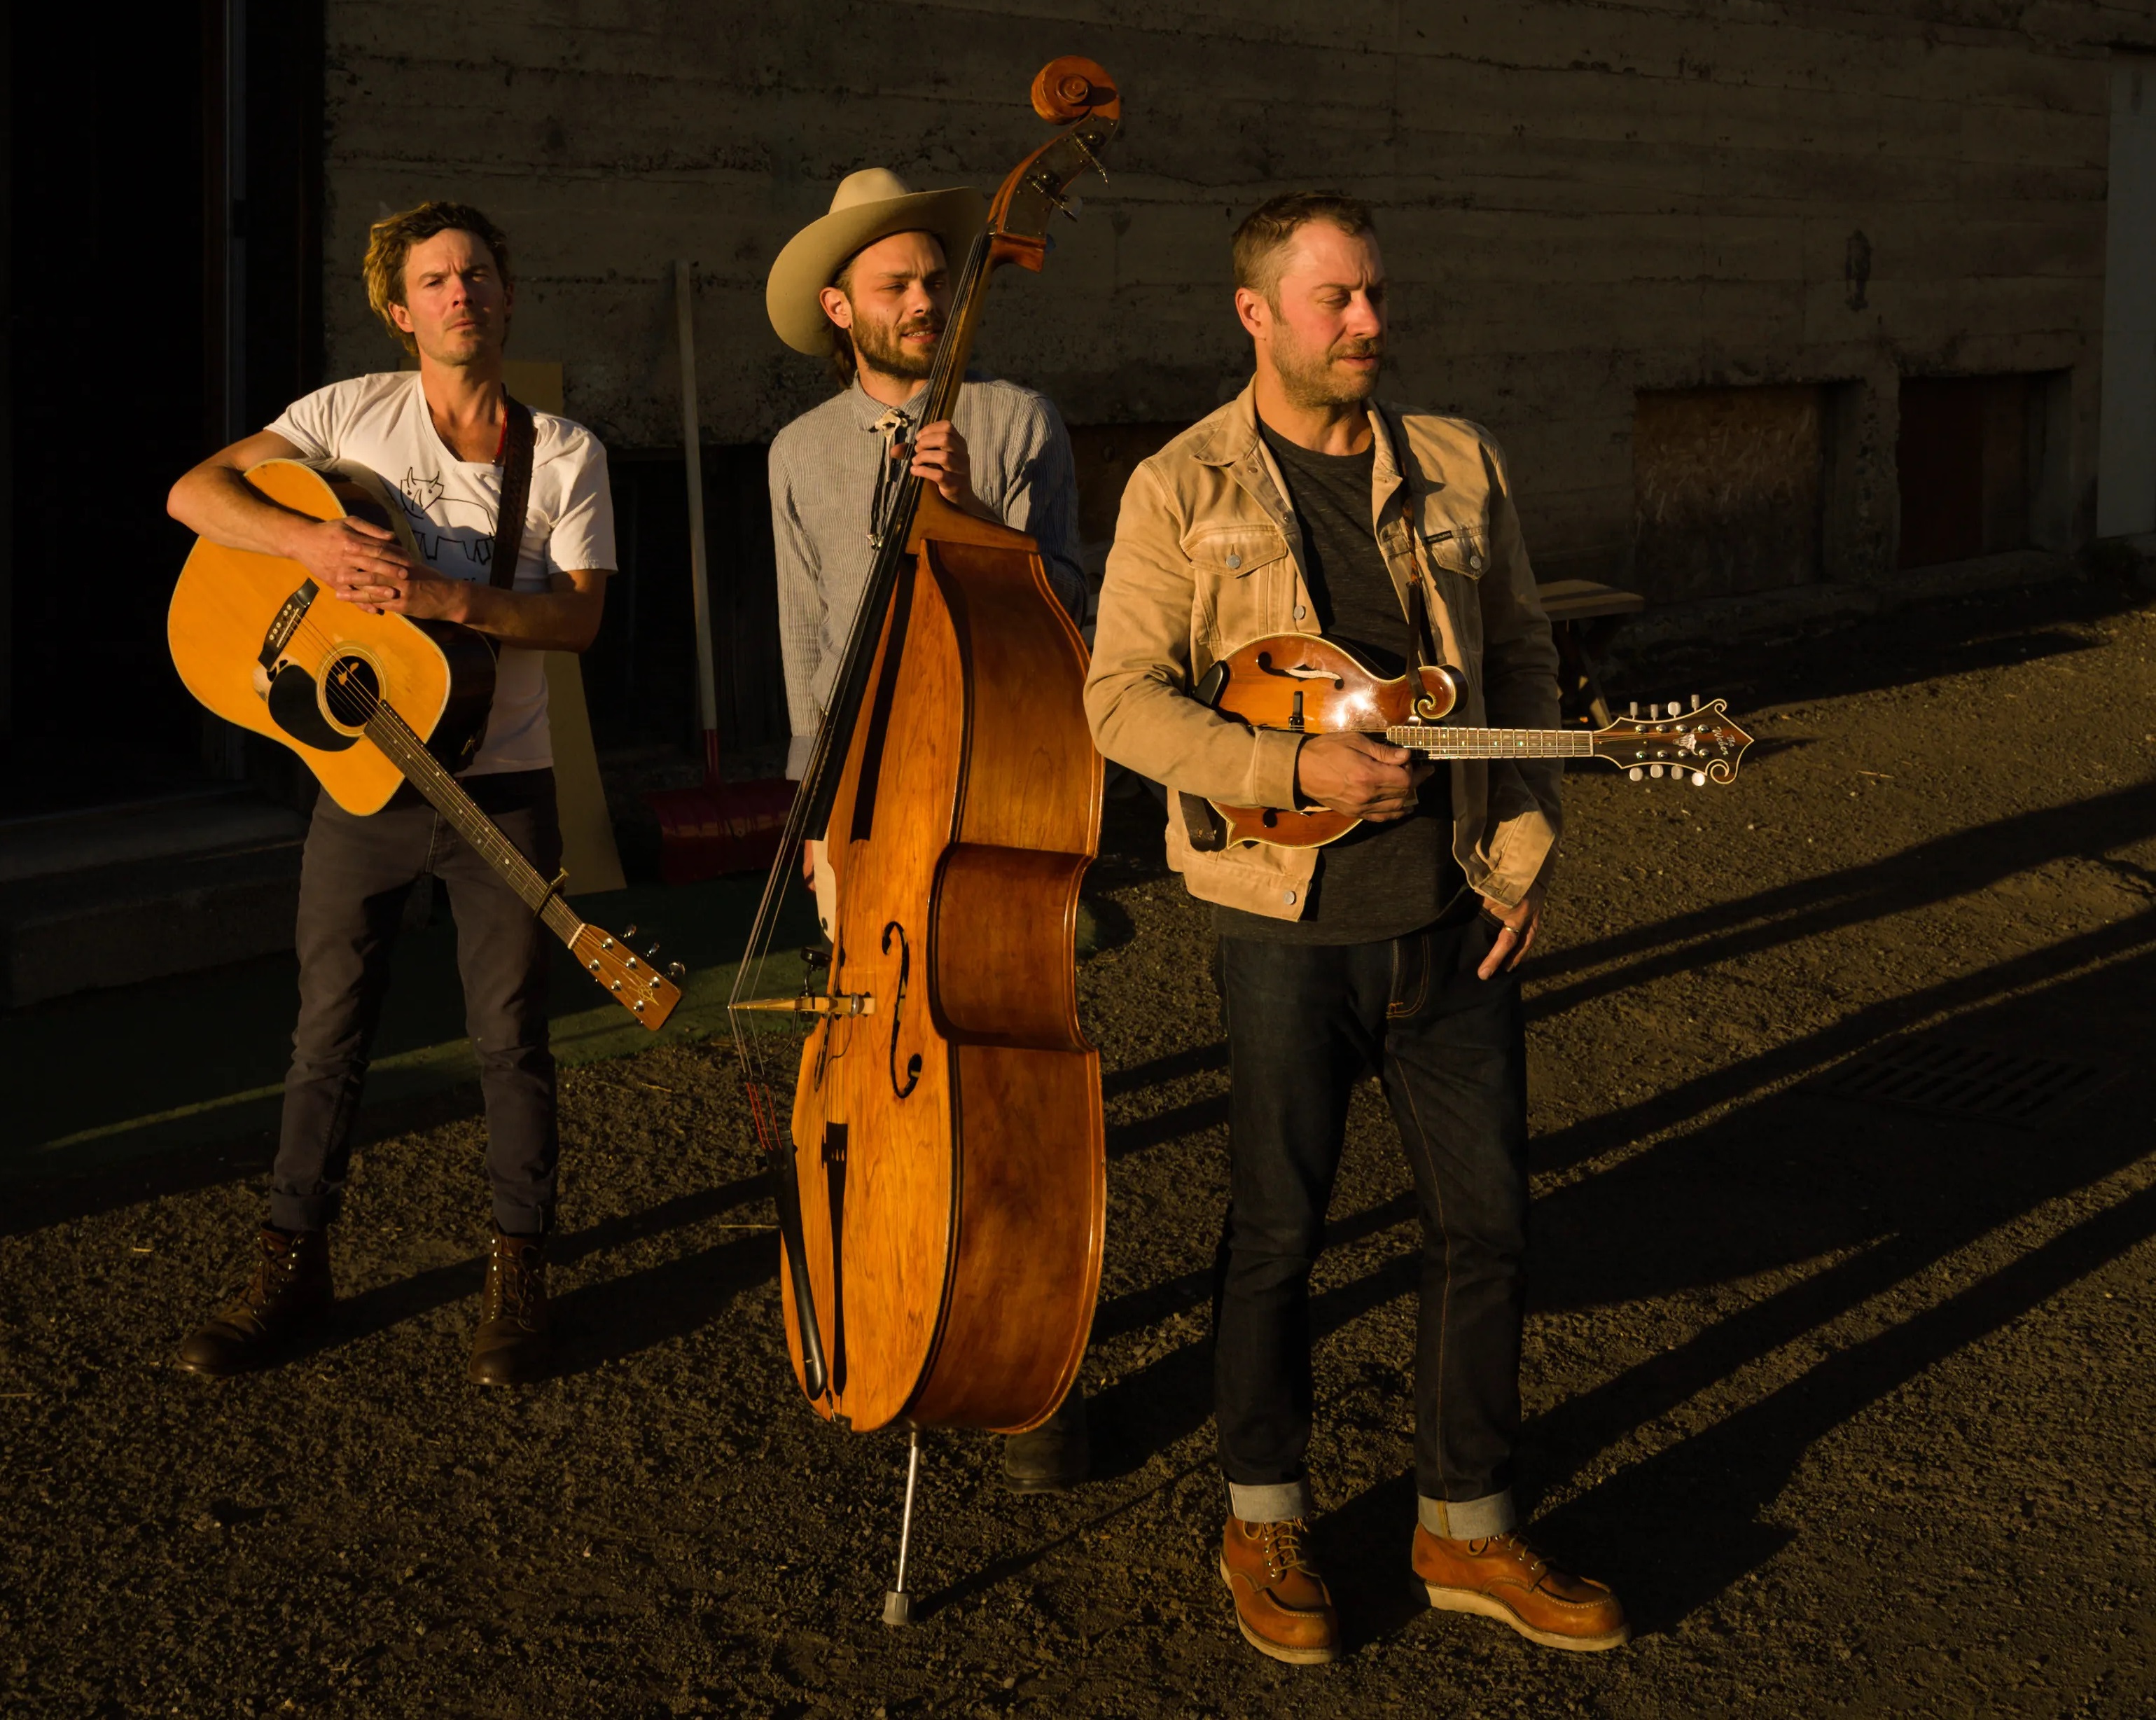 The Pine Hearts bridge bluegrass and Americana with punk roots